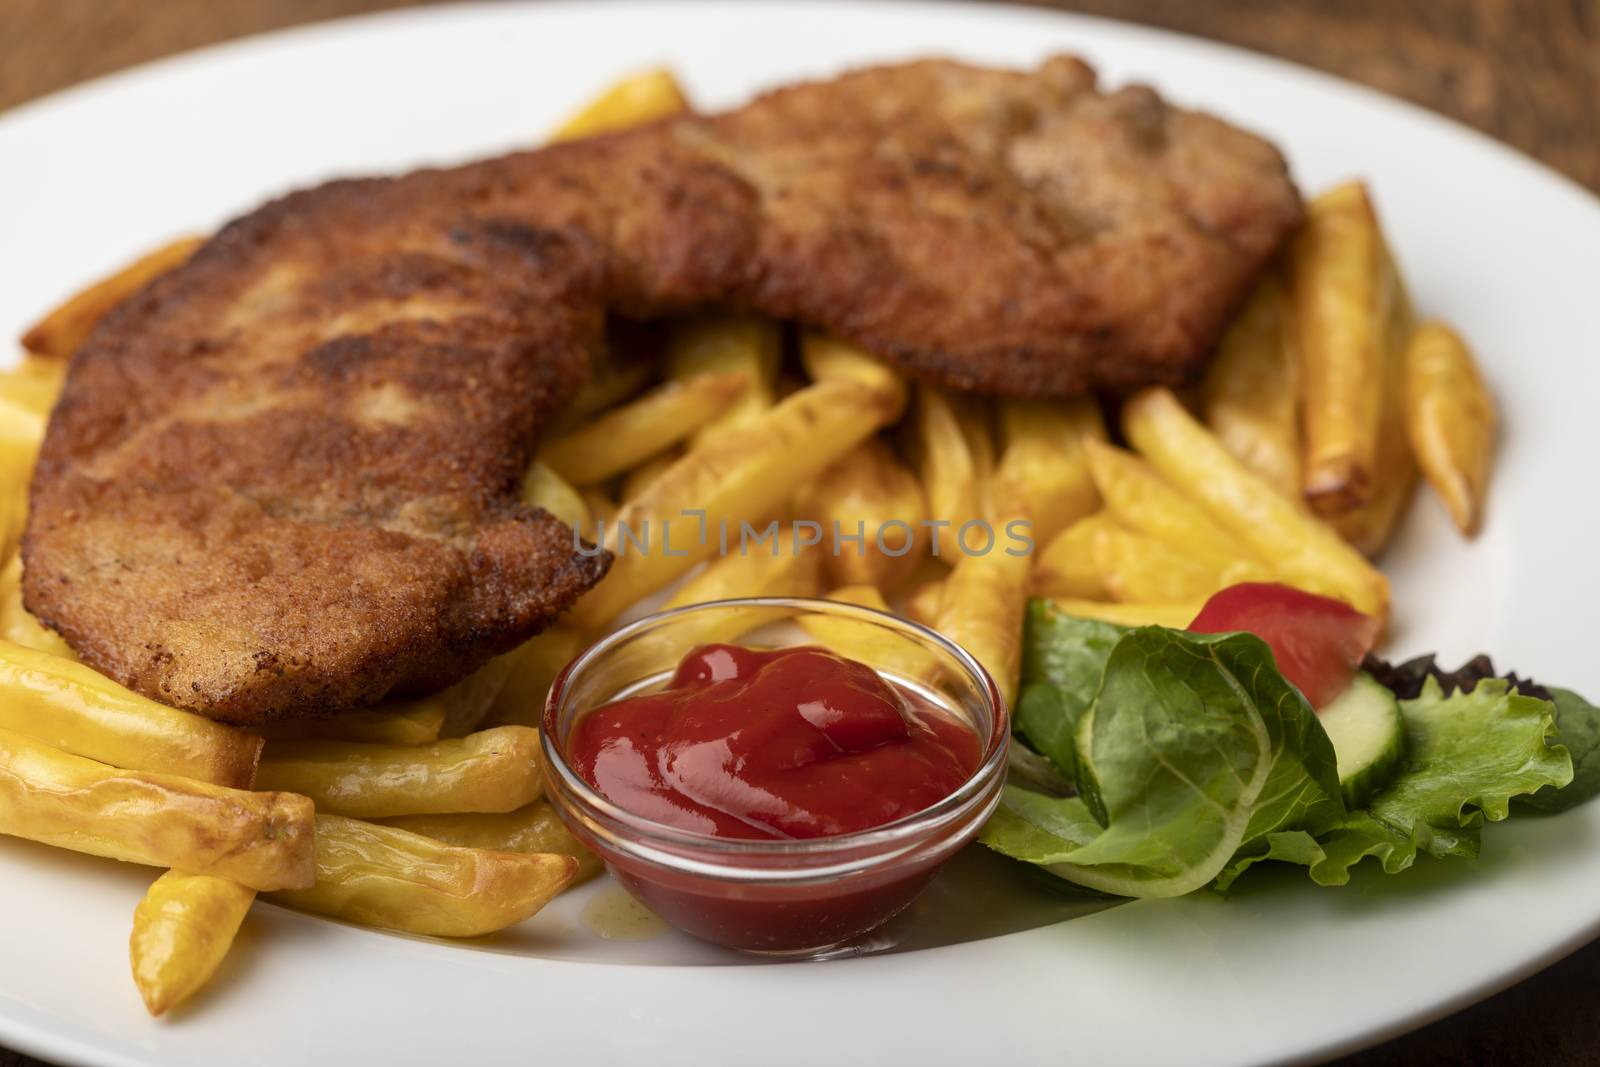 wiener schnitzel with french fries on a plate